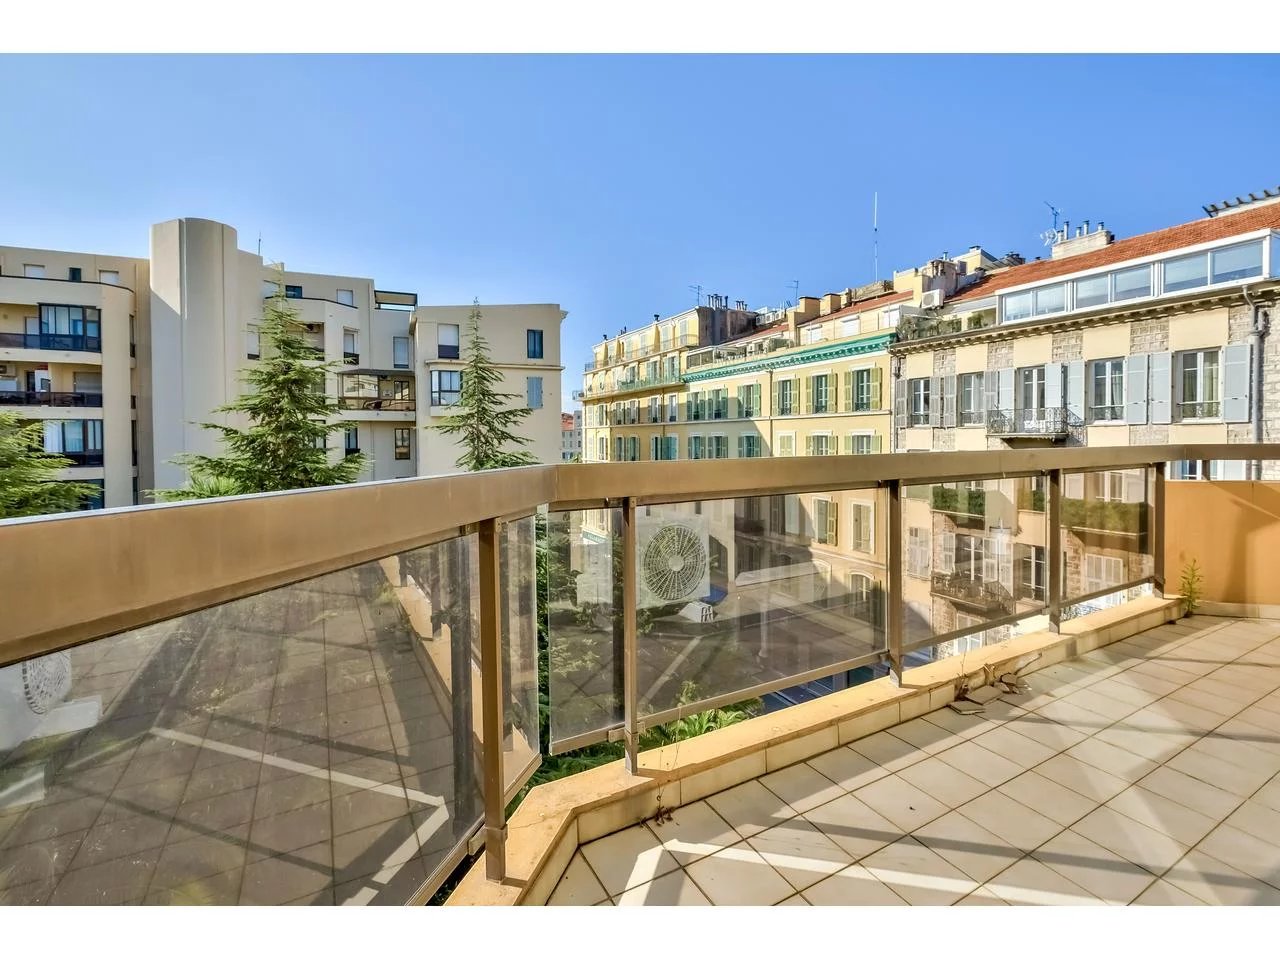 Appartement  4 Rooms 89.68m2  for sale   845 000 €